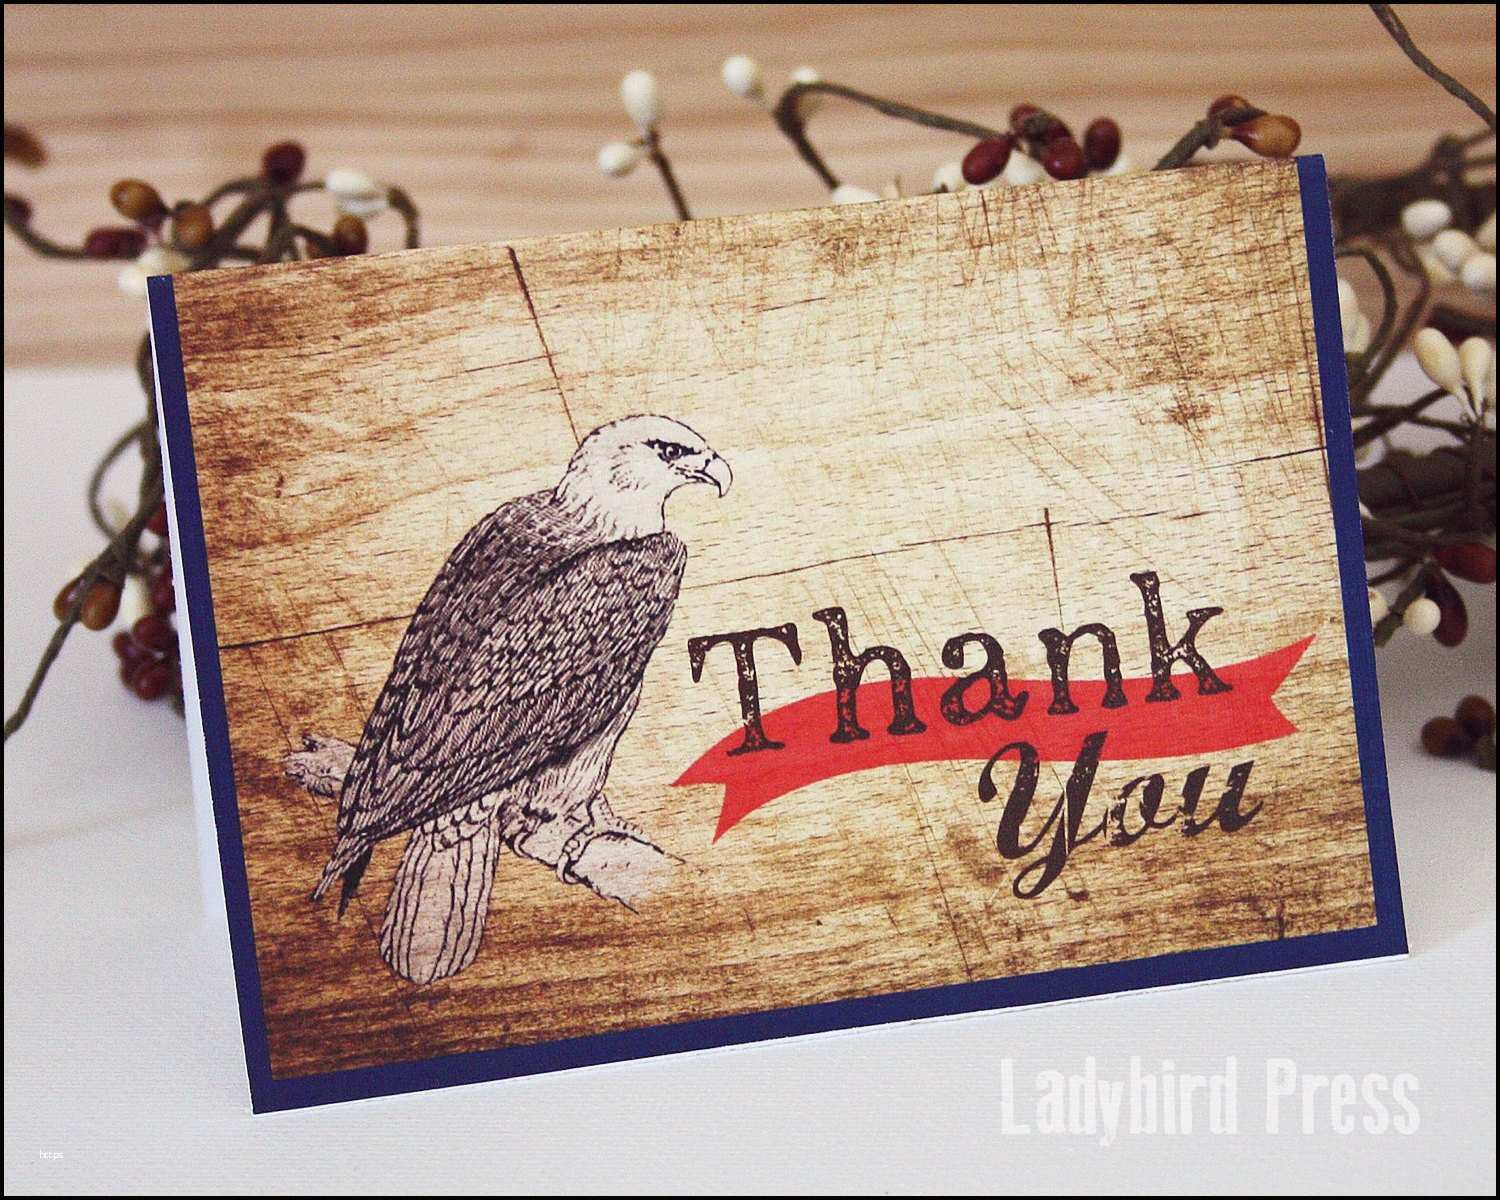 Eagle Scout Cards Free Printable Pleasant Printable Thank You Card - Free Printable Eagle Scout Thank You Cards